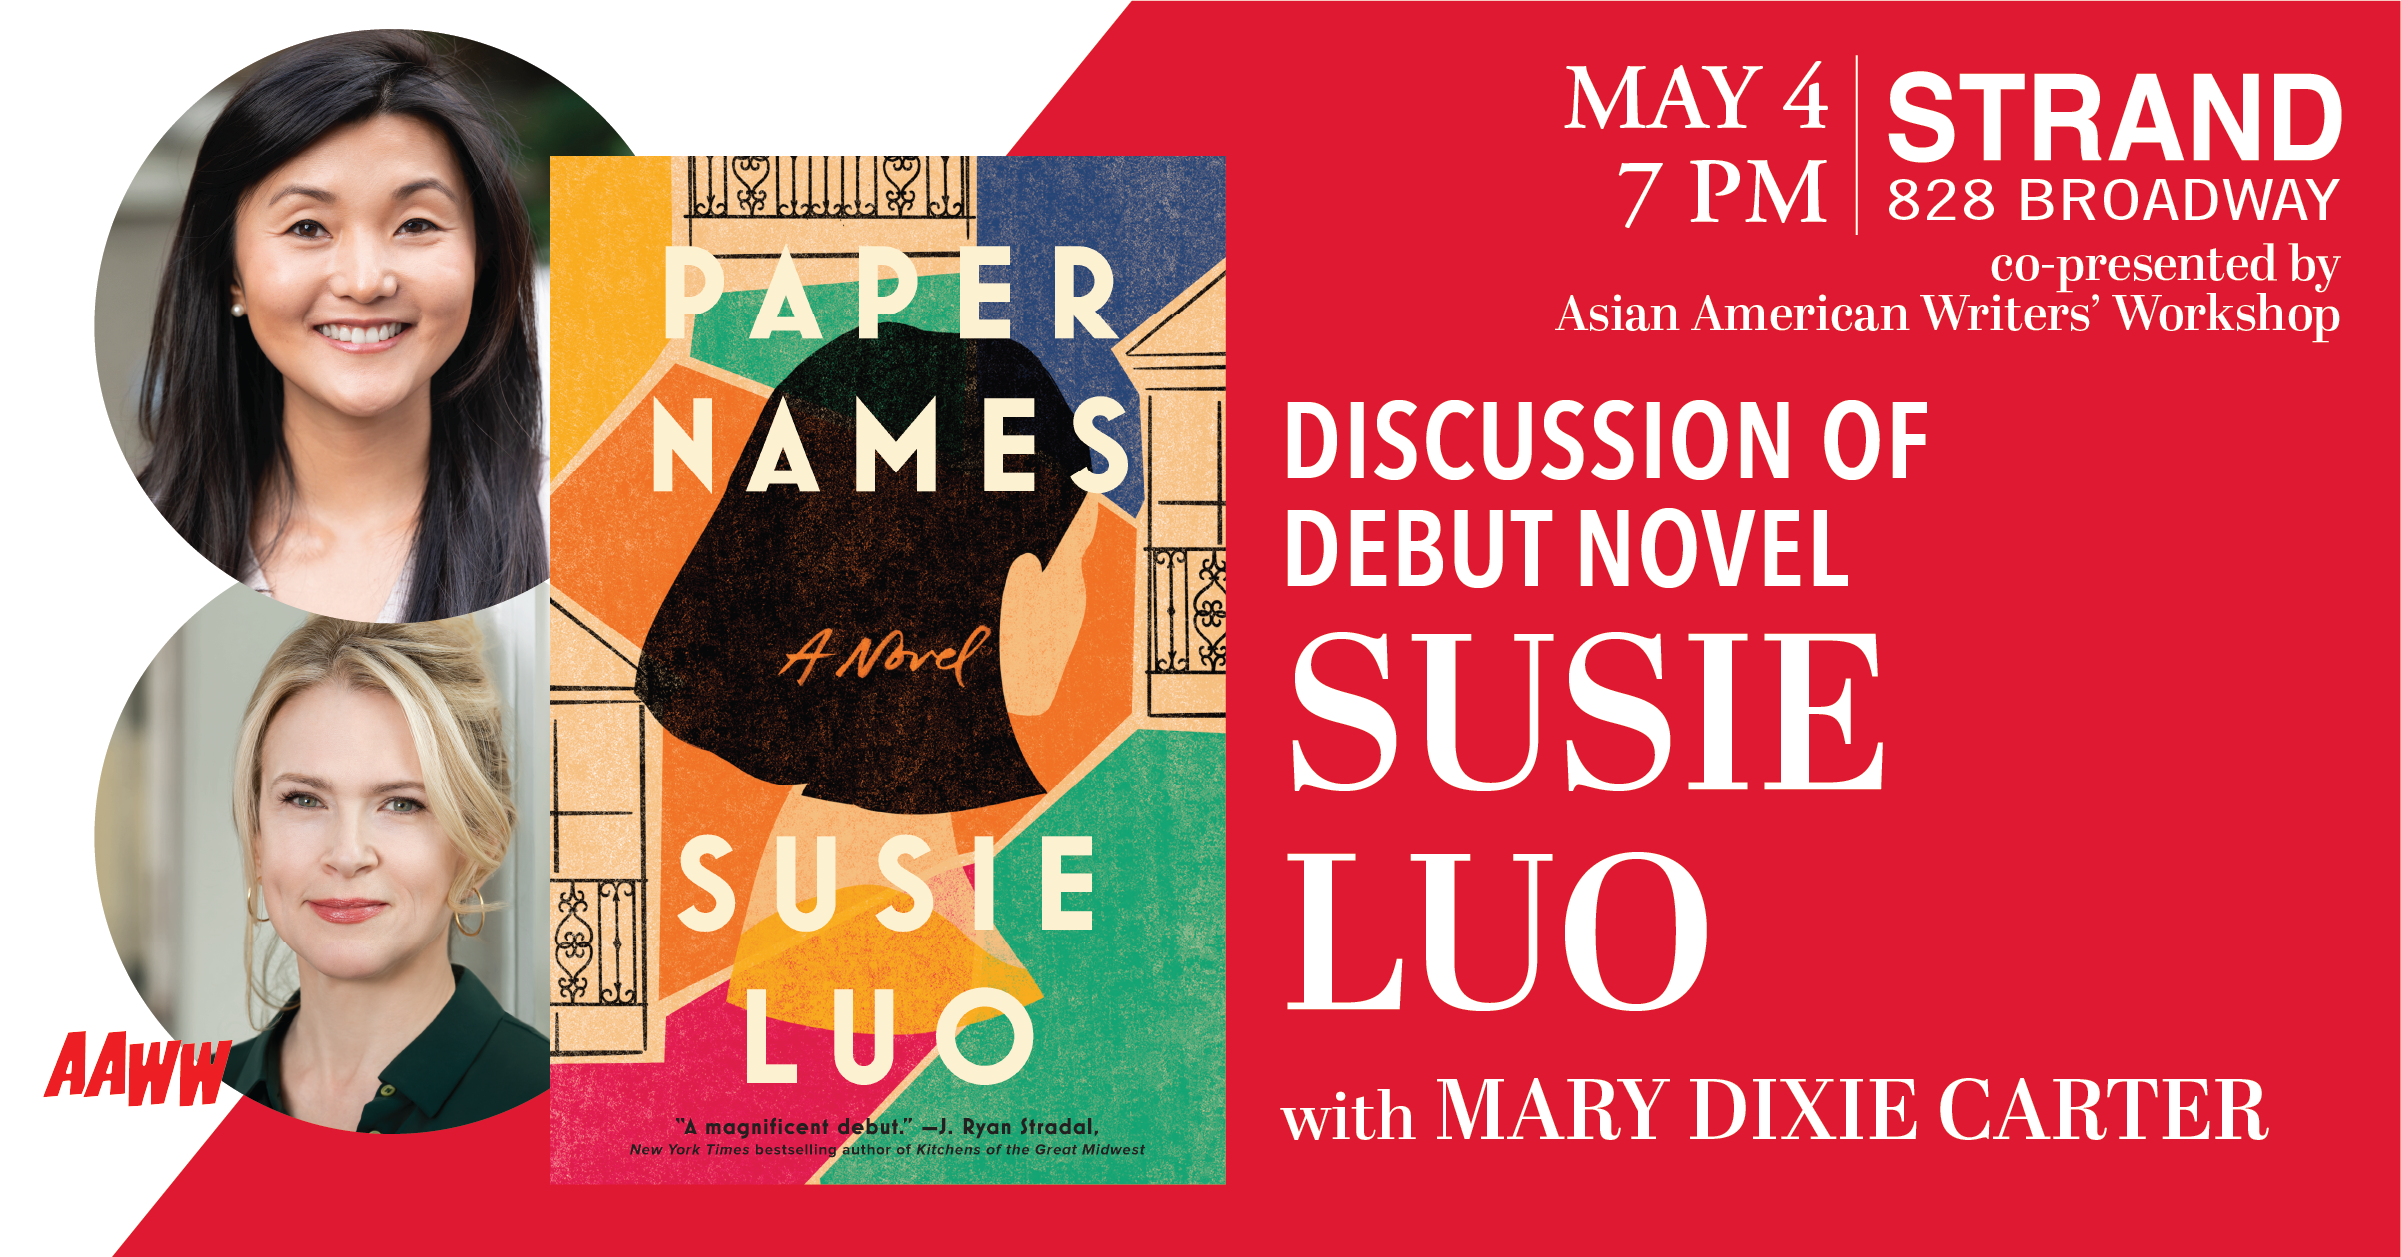 AAWW & The Strand Present: Paper Names by Susie Luo